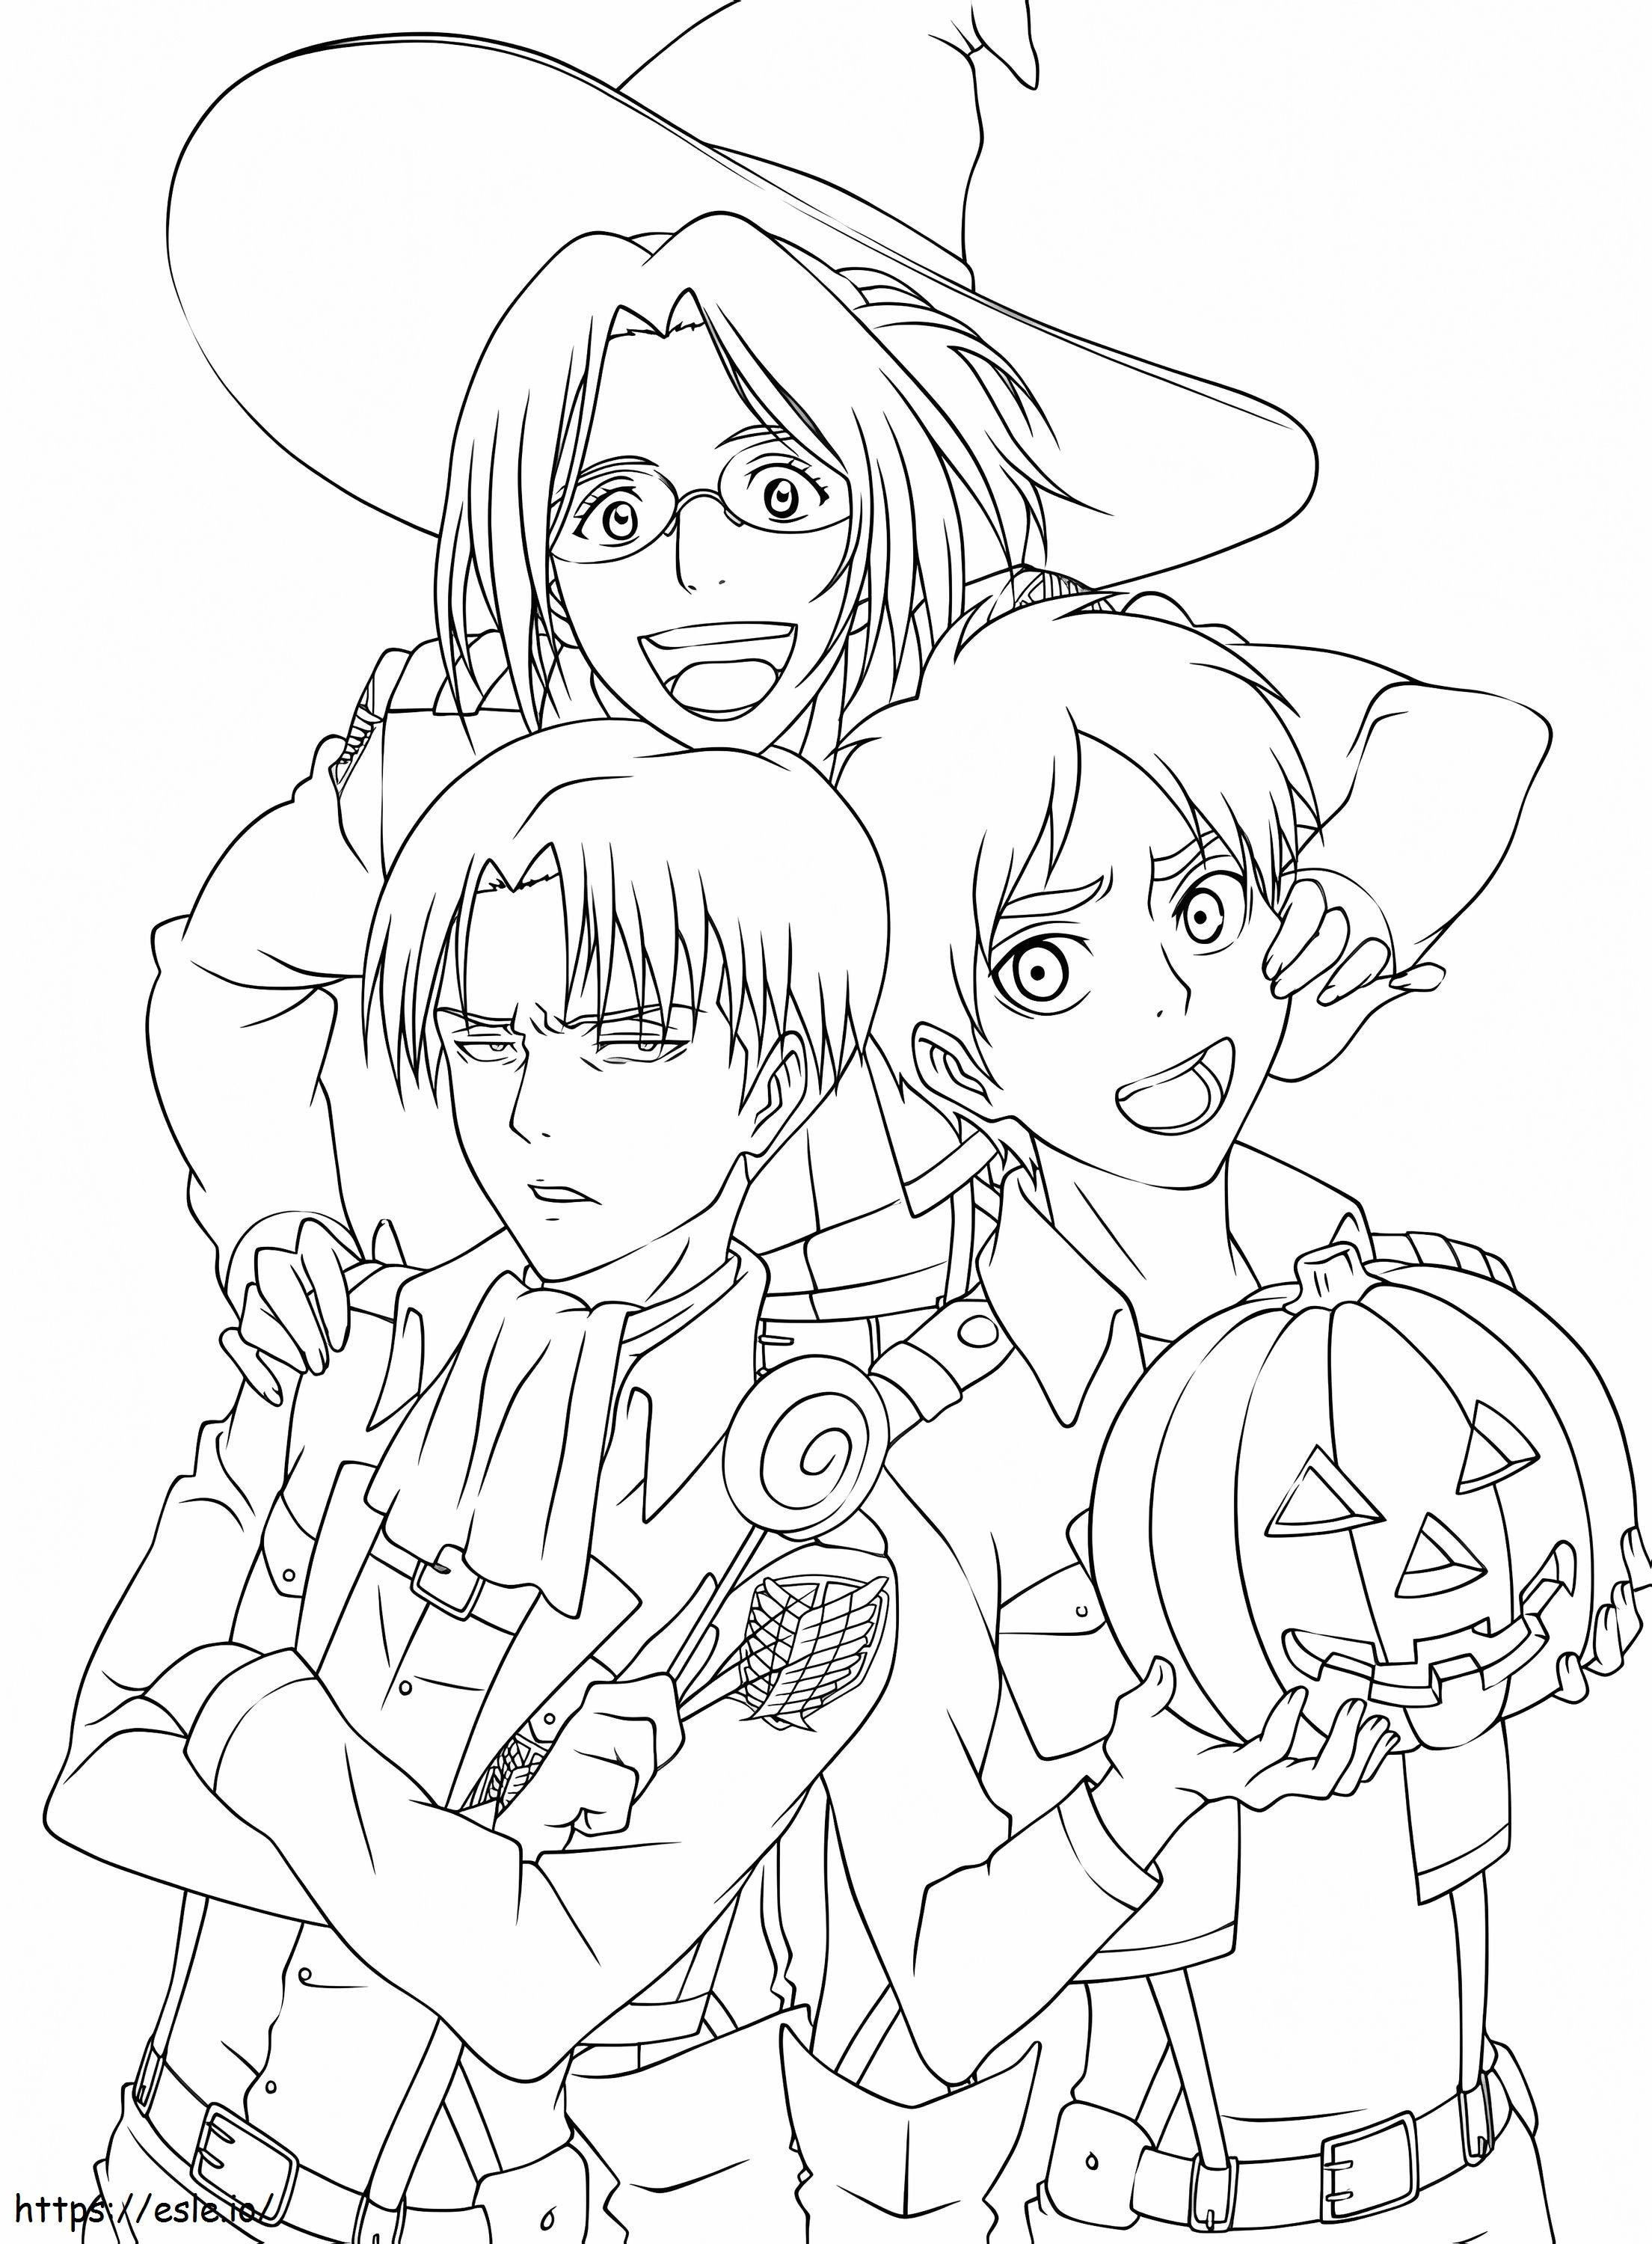 Funny Levi coloring page